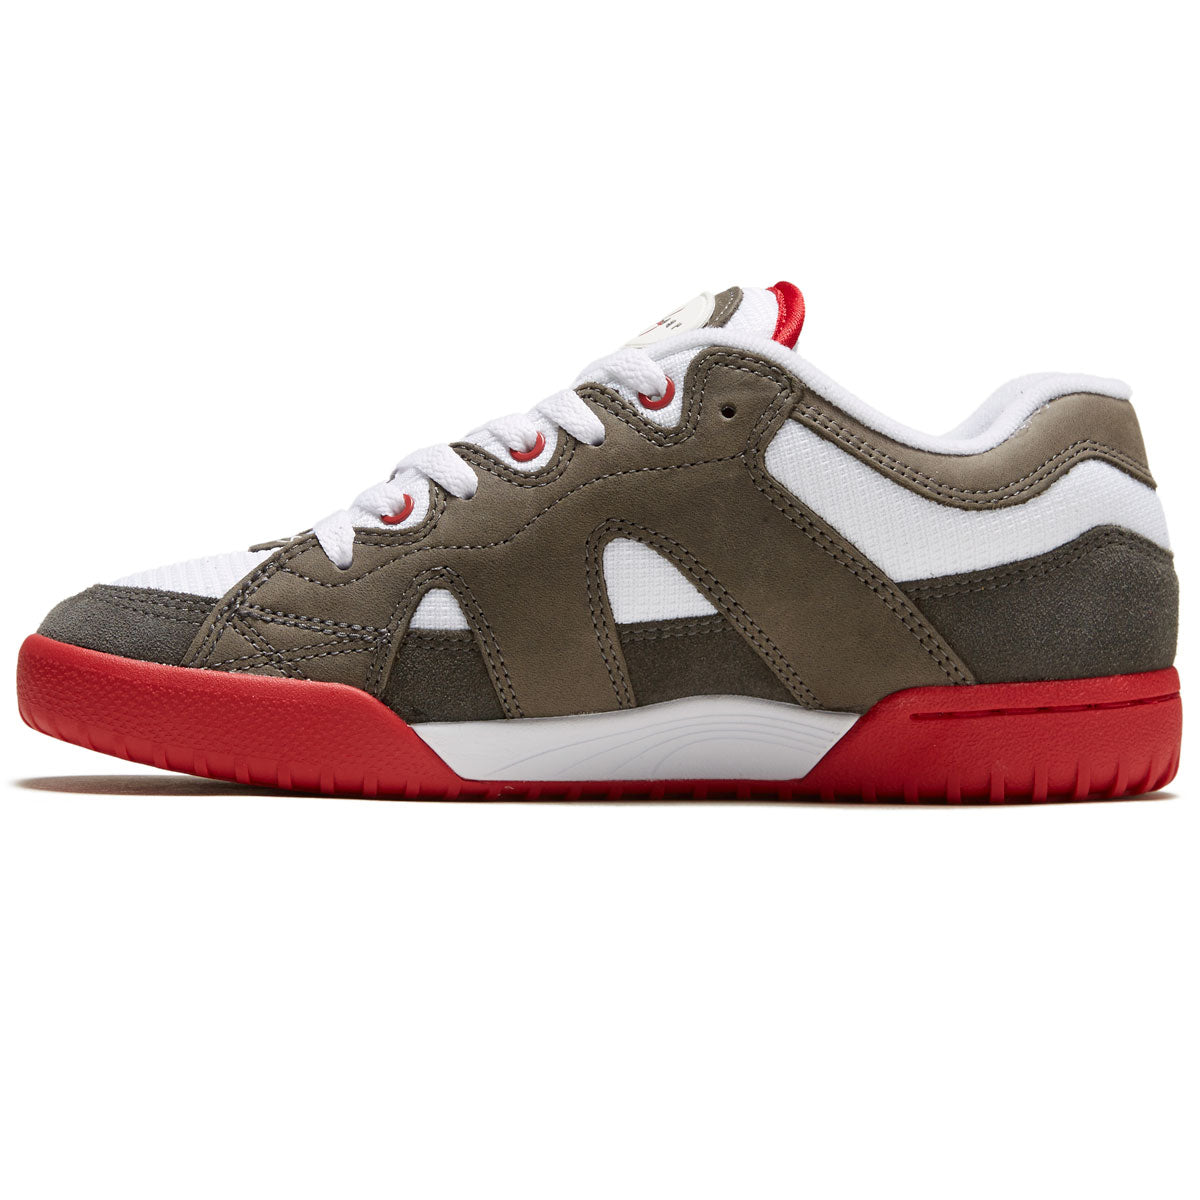 eS One Nine 7 Shoes - Grey/Red/White image 2